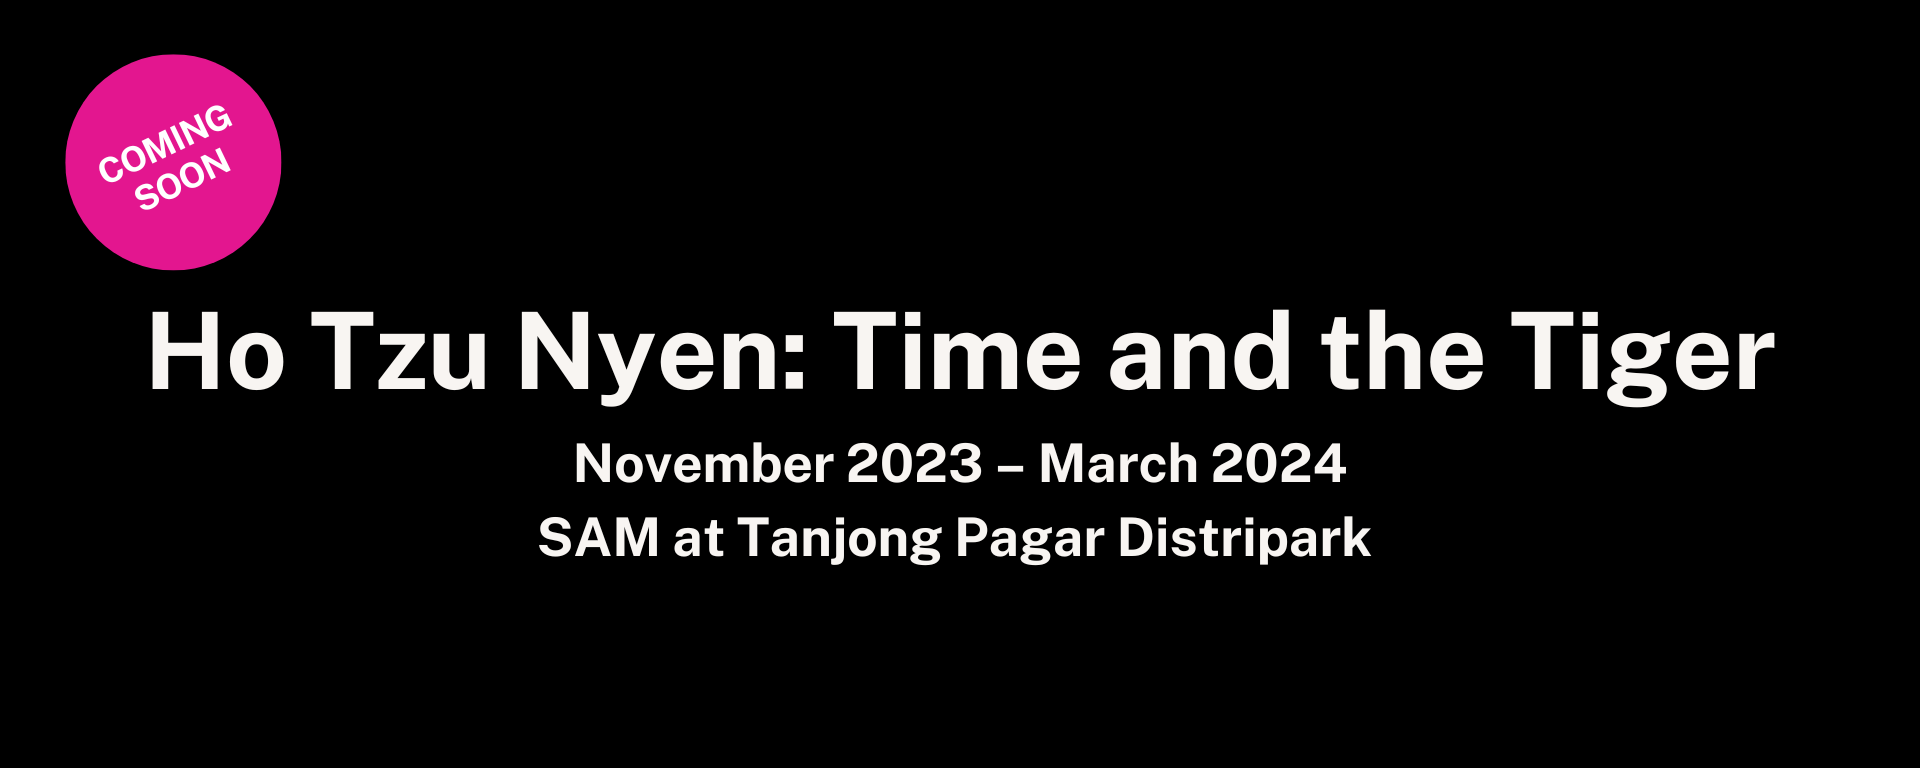 Ho Tzu Nyen: Time and the Tiger